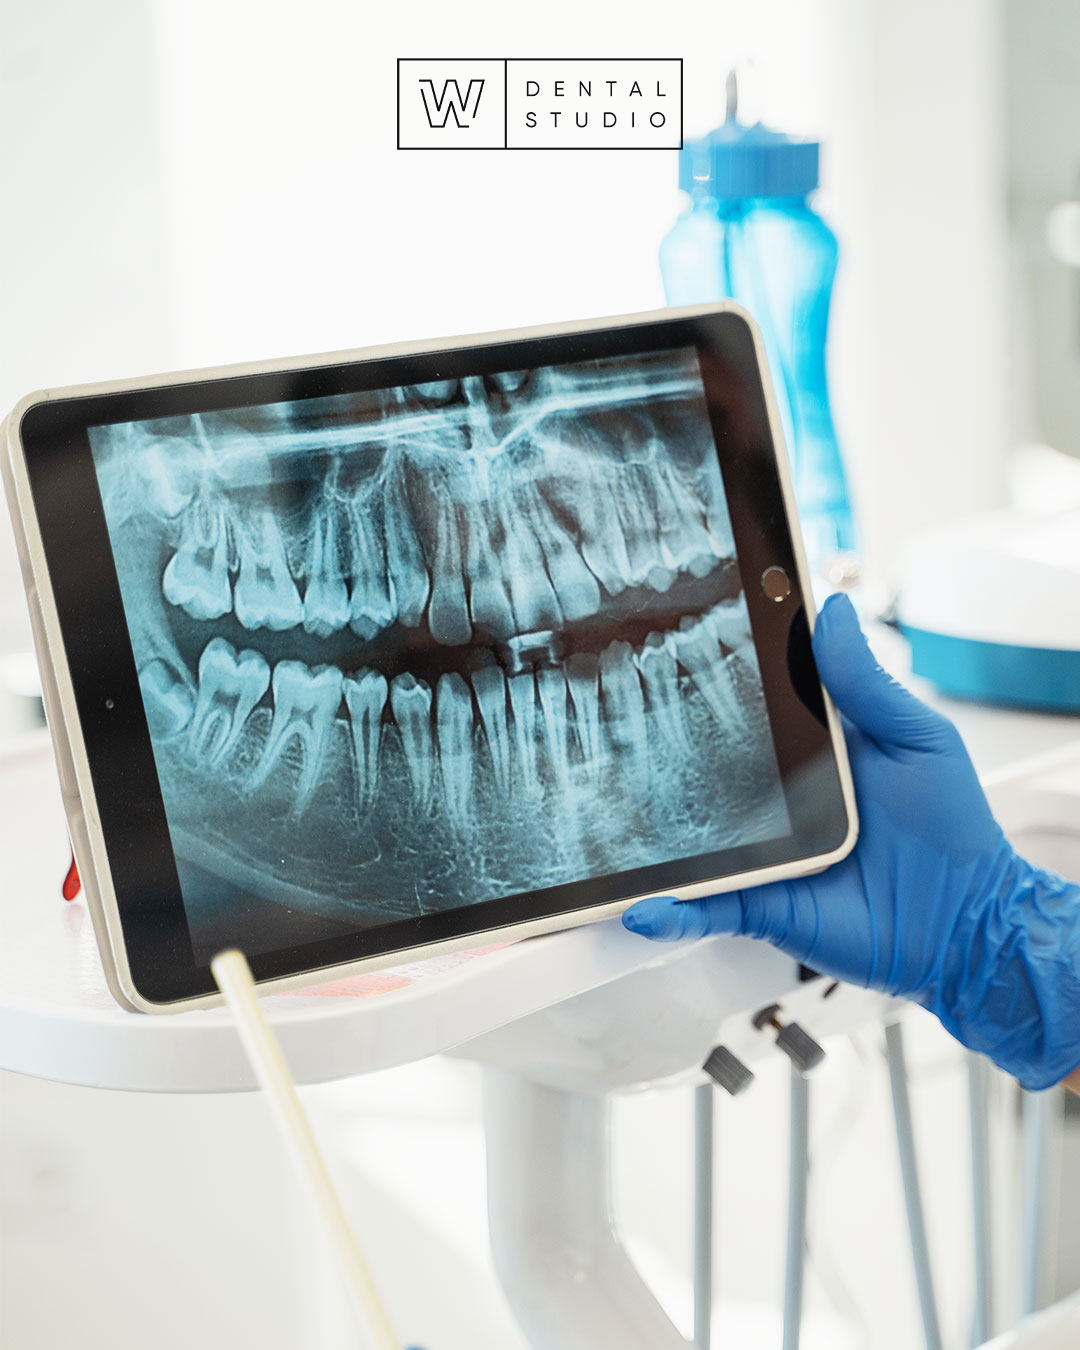 Did you know dental X-rays (radiographs) are images of your teeth that your dentist uses to evaluate your oral health? This can help your dentist to identify problems, like cavities, tooth decay, and impacted teeth.

📞 613-564-3300
📍 270 Richmond Rd, Ottawa, ON
🖥 https://www.wdentalstudio.com
📧 info@wdentalstudio.com